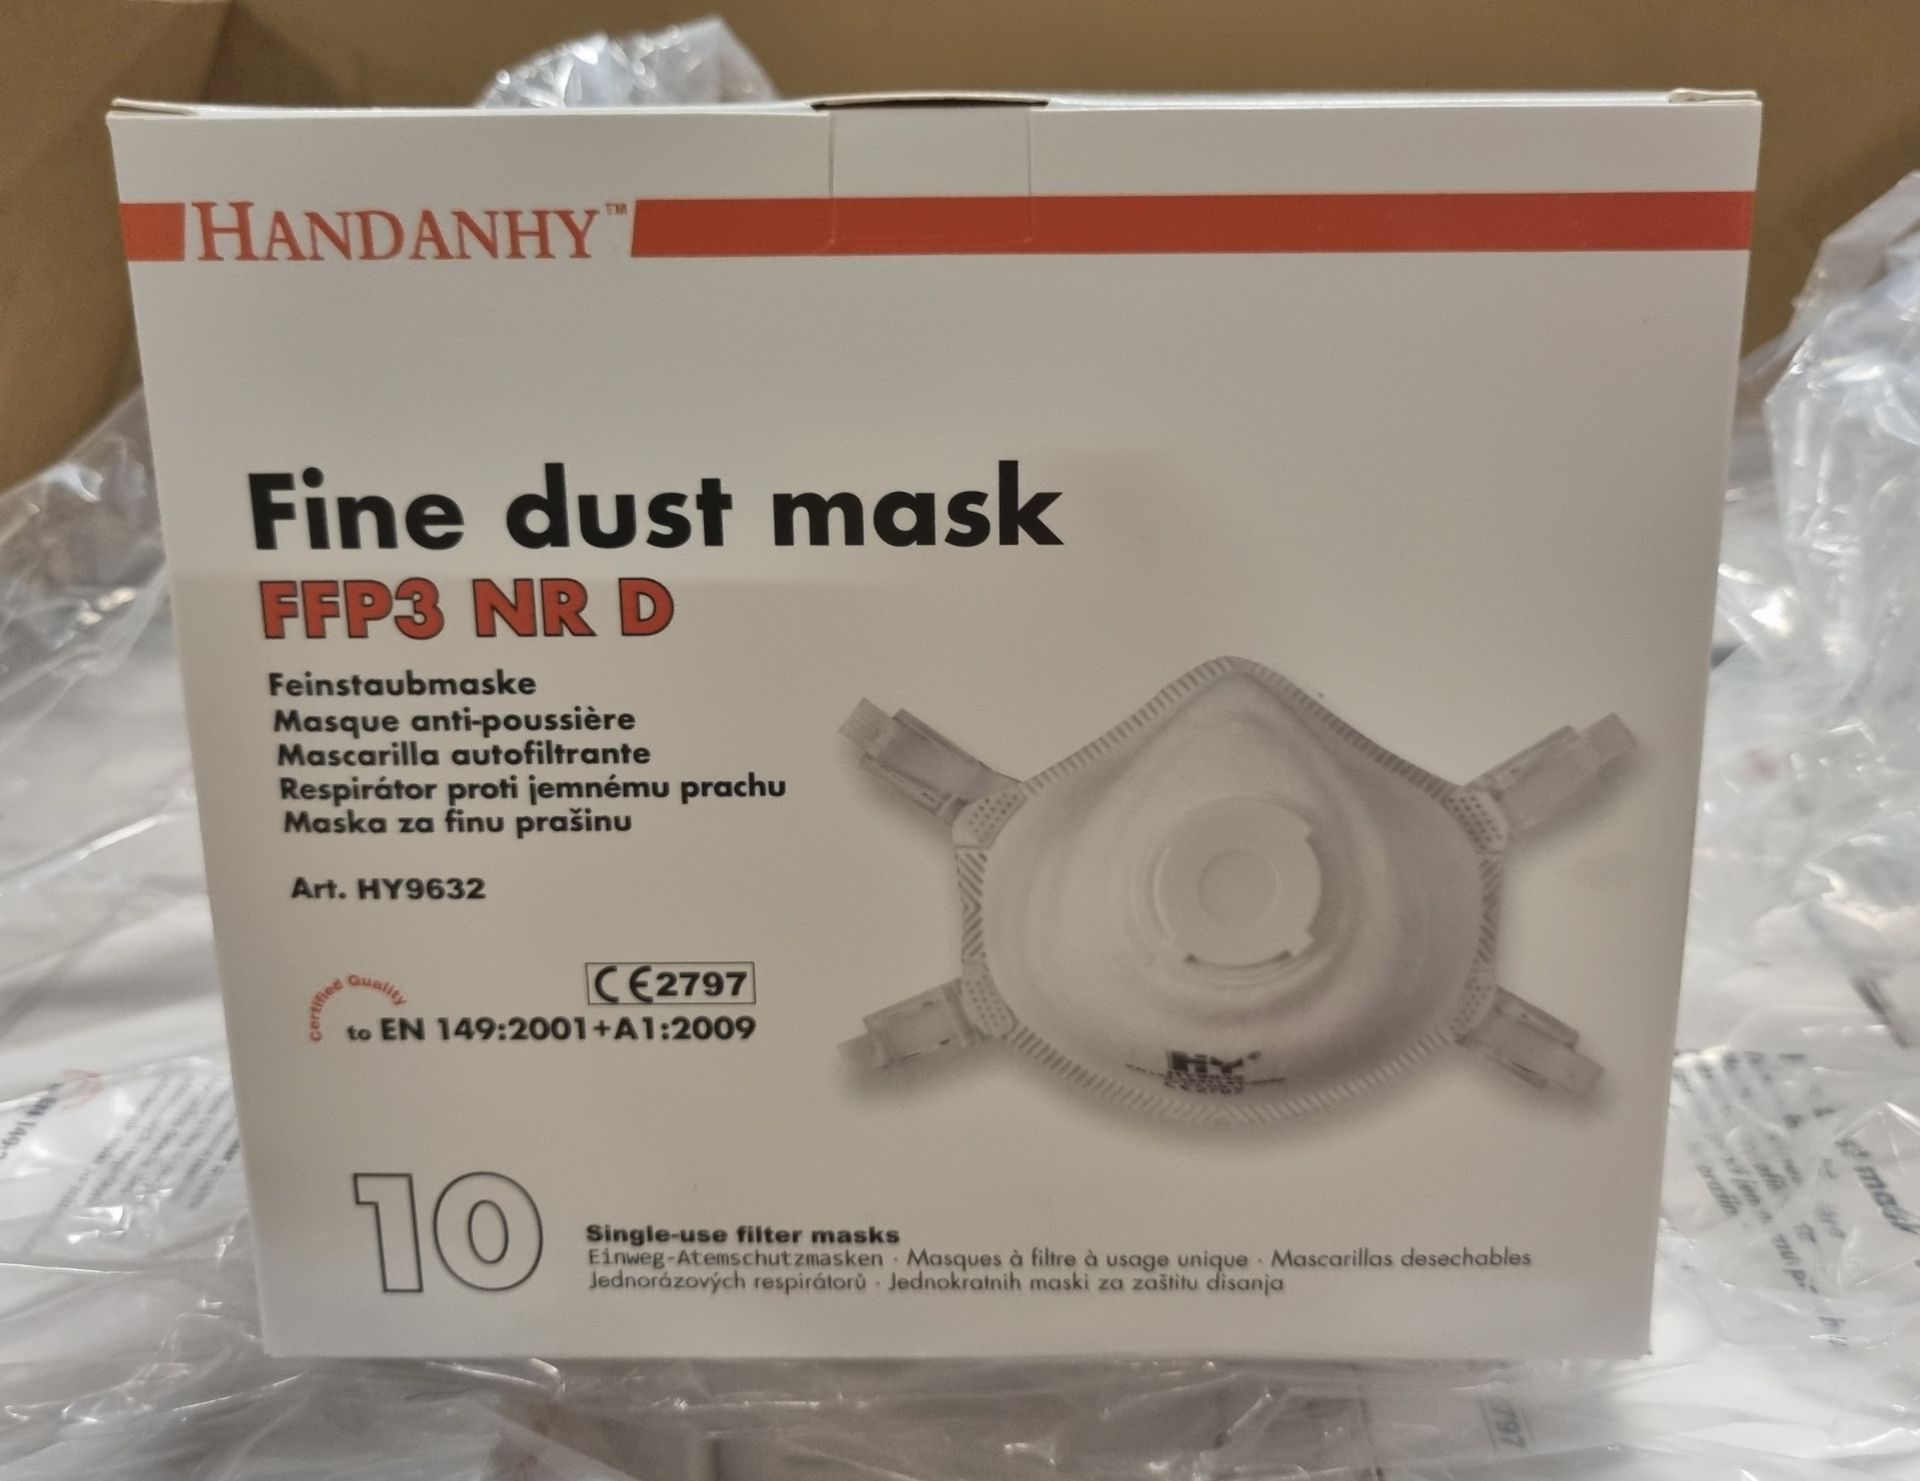 Handanhy particulate respirators & dust masks - full details in the description - Image 4 of 4